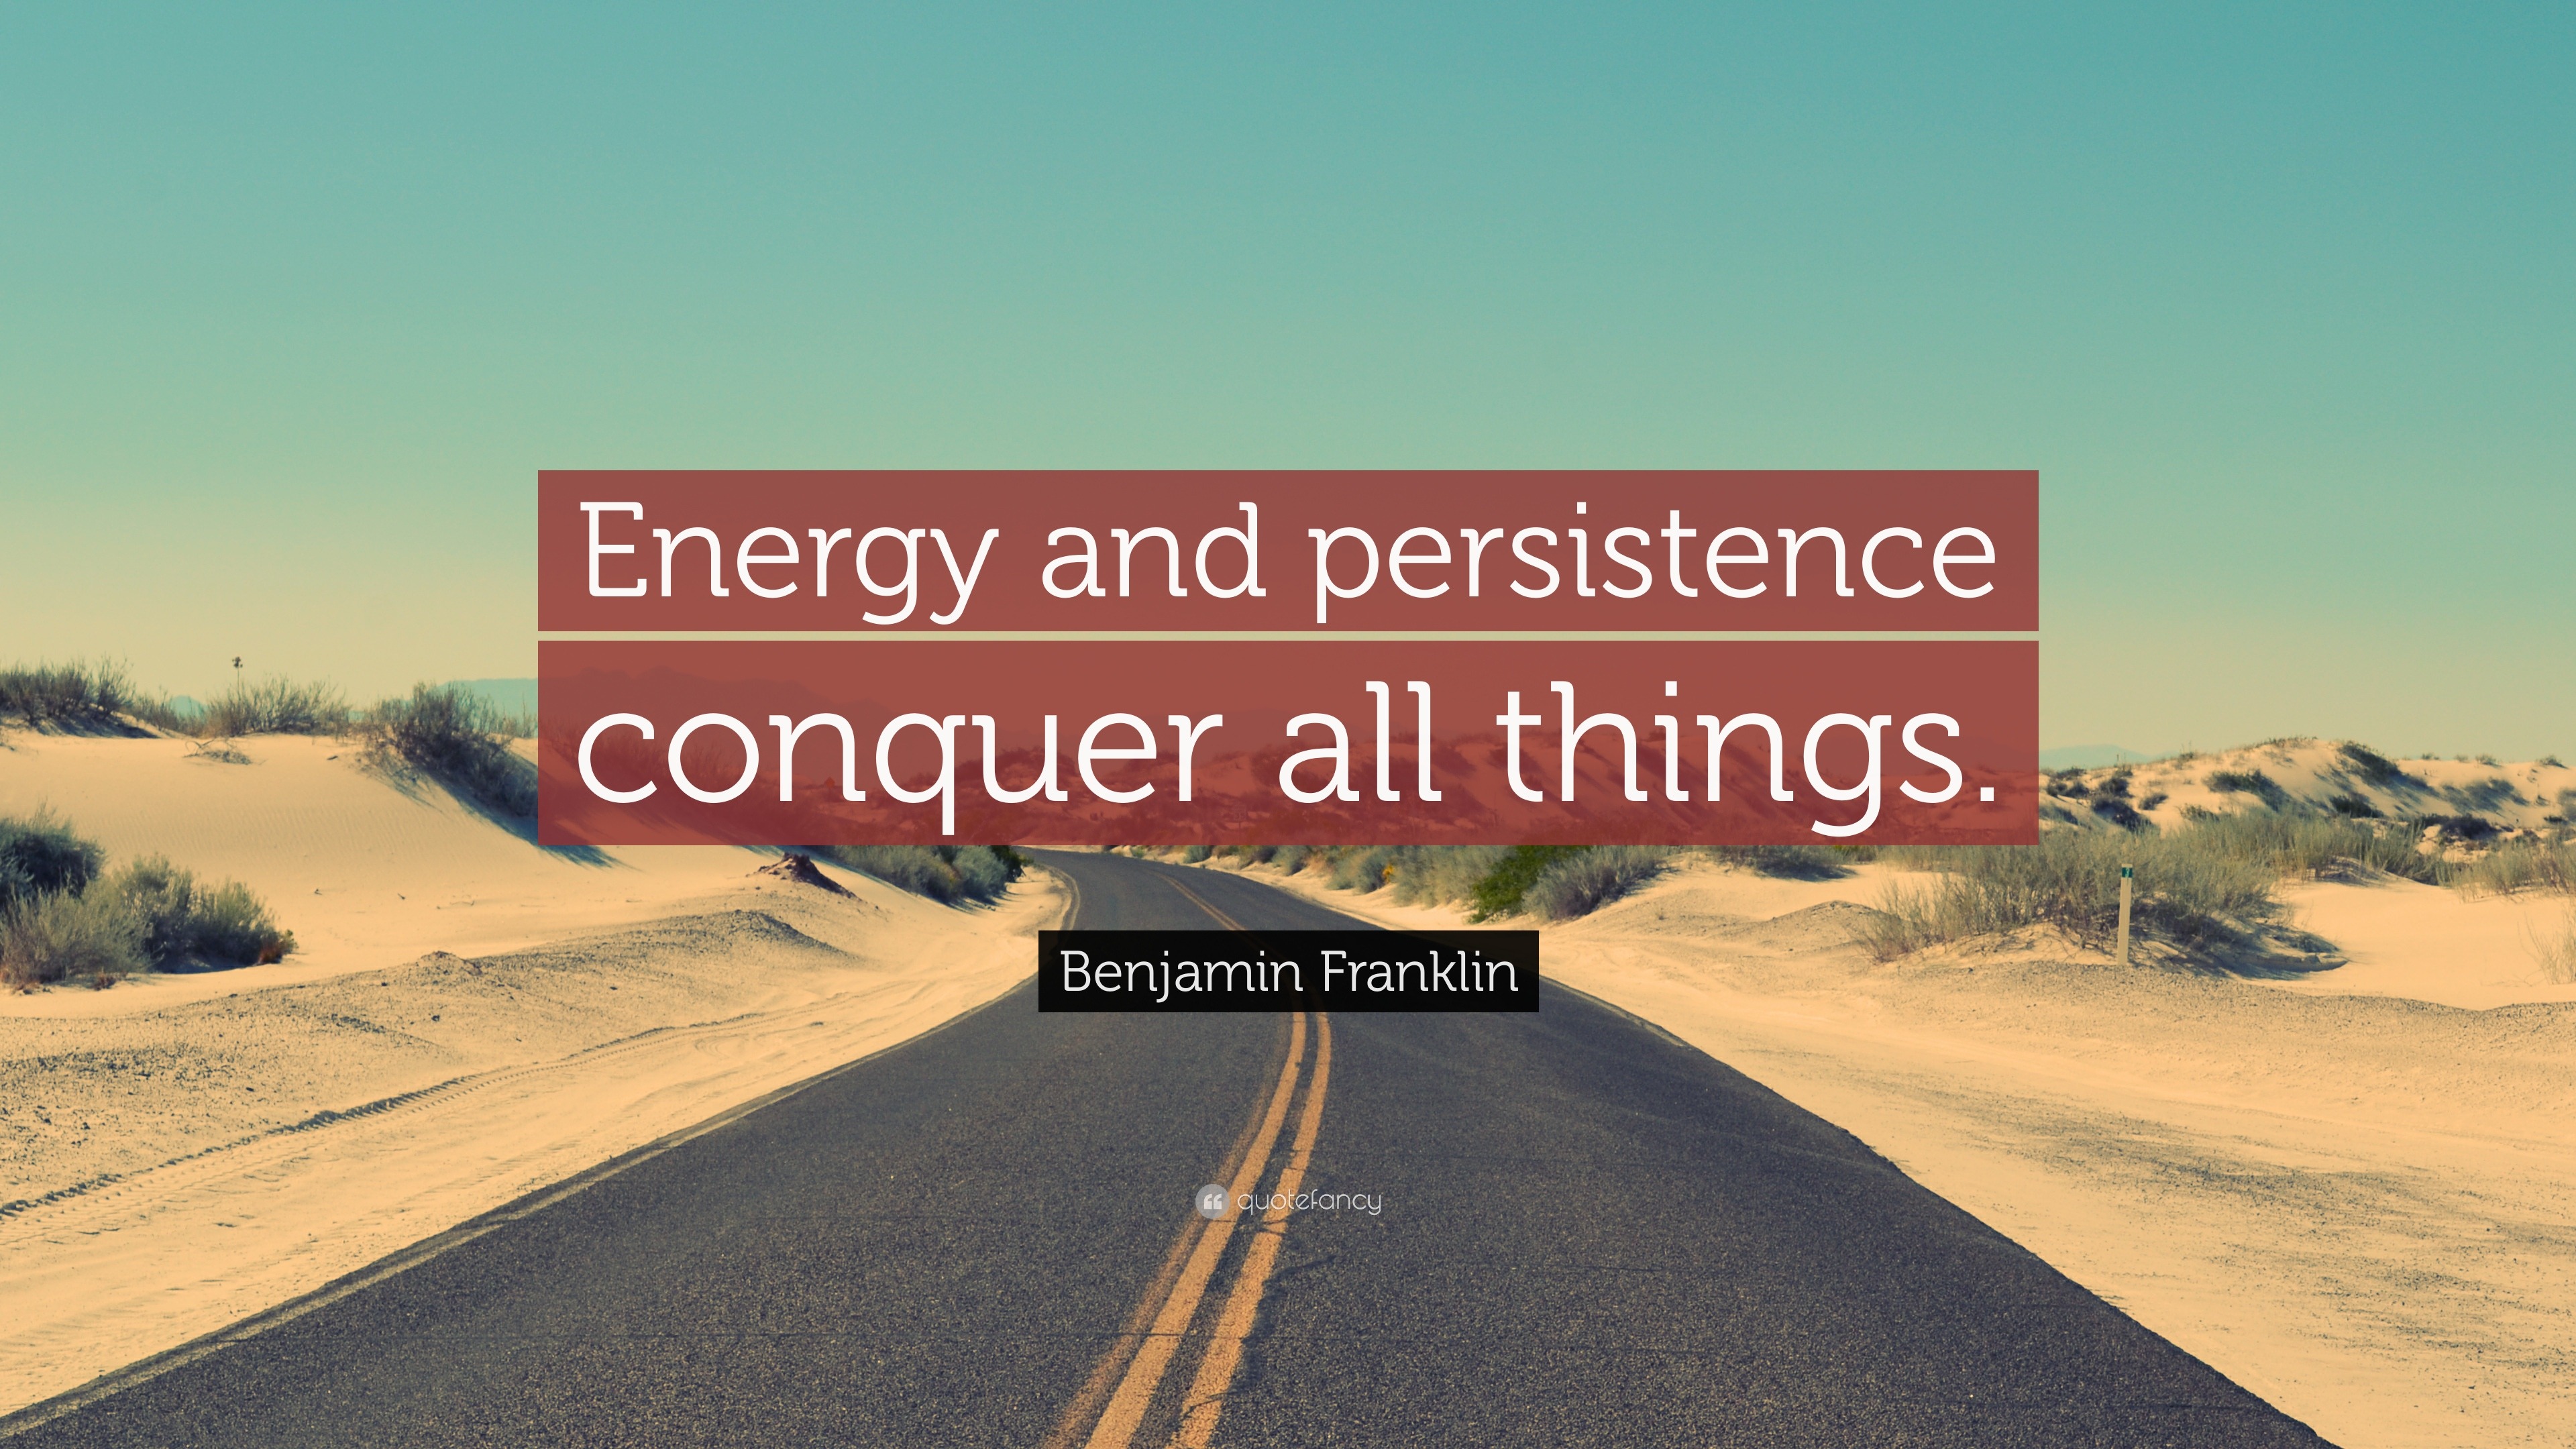 Benjamin Franklin Quote: “Energy and persistence conquer all things.”